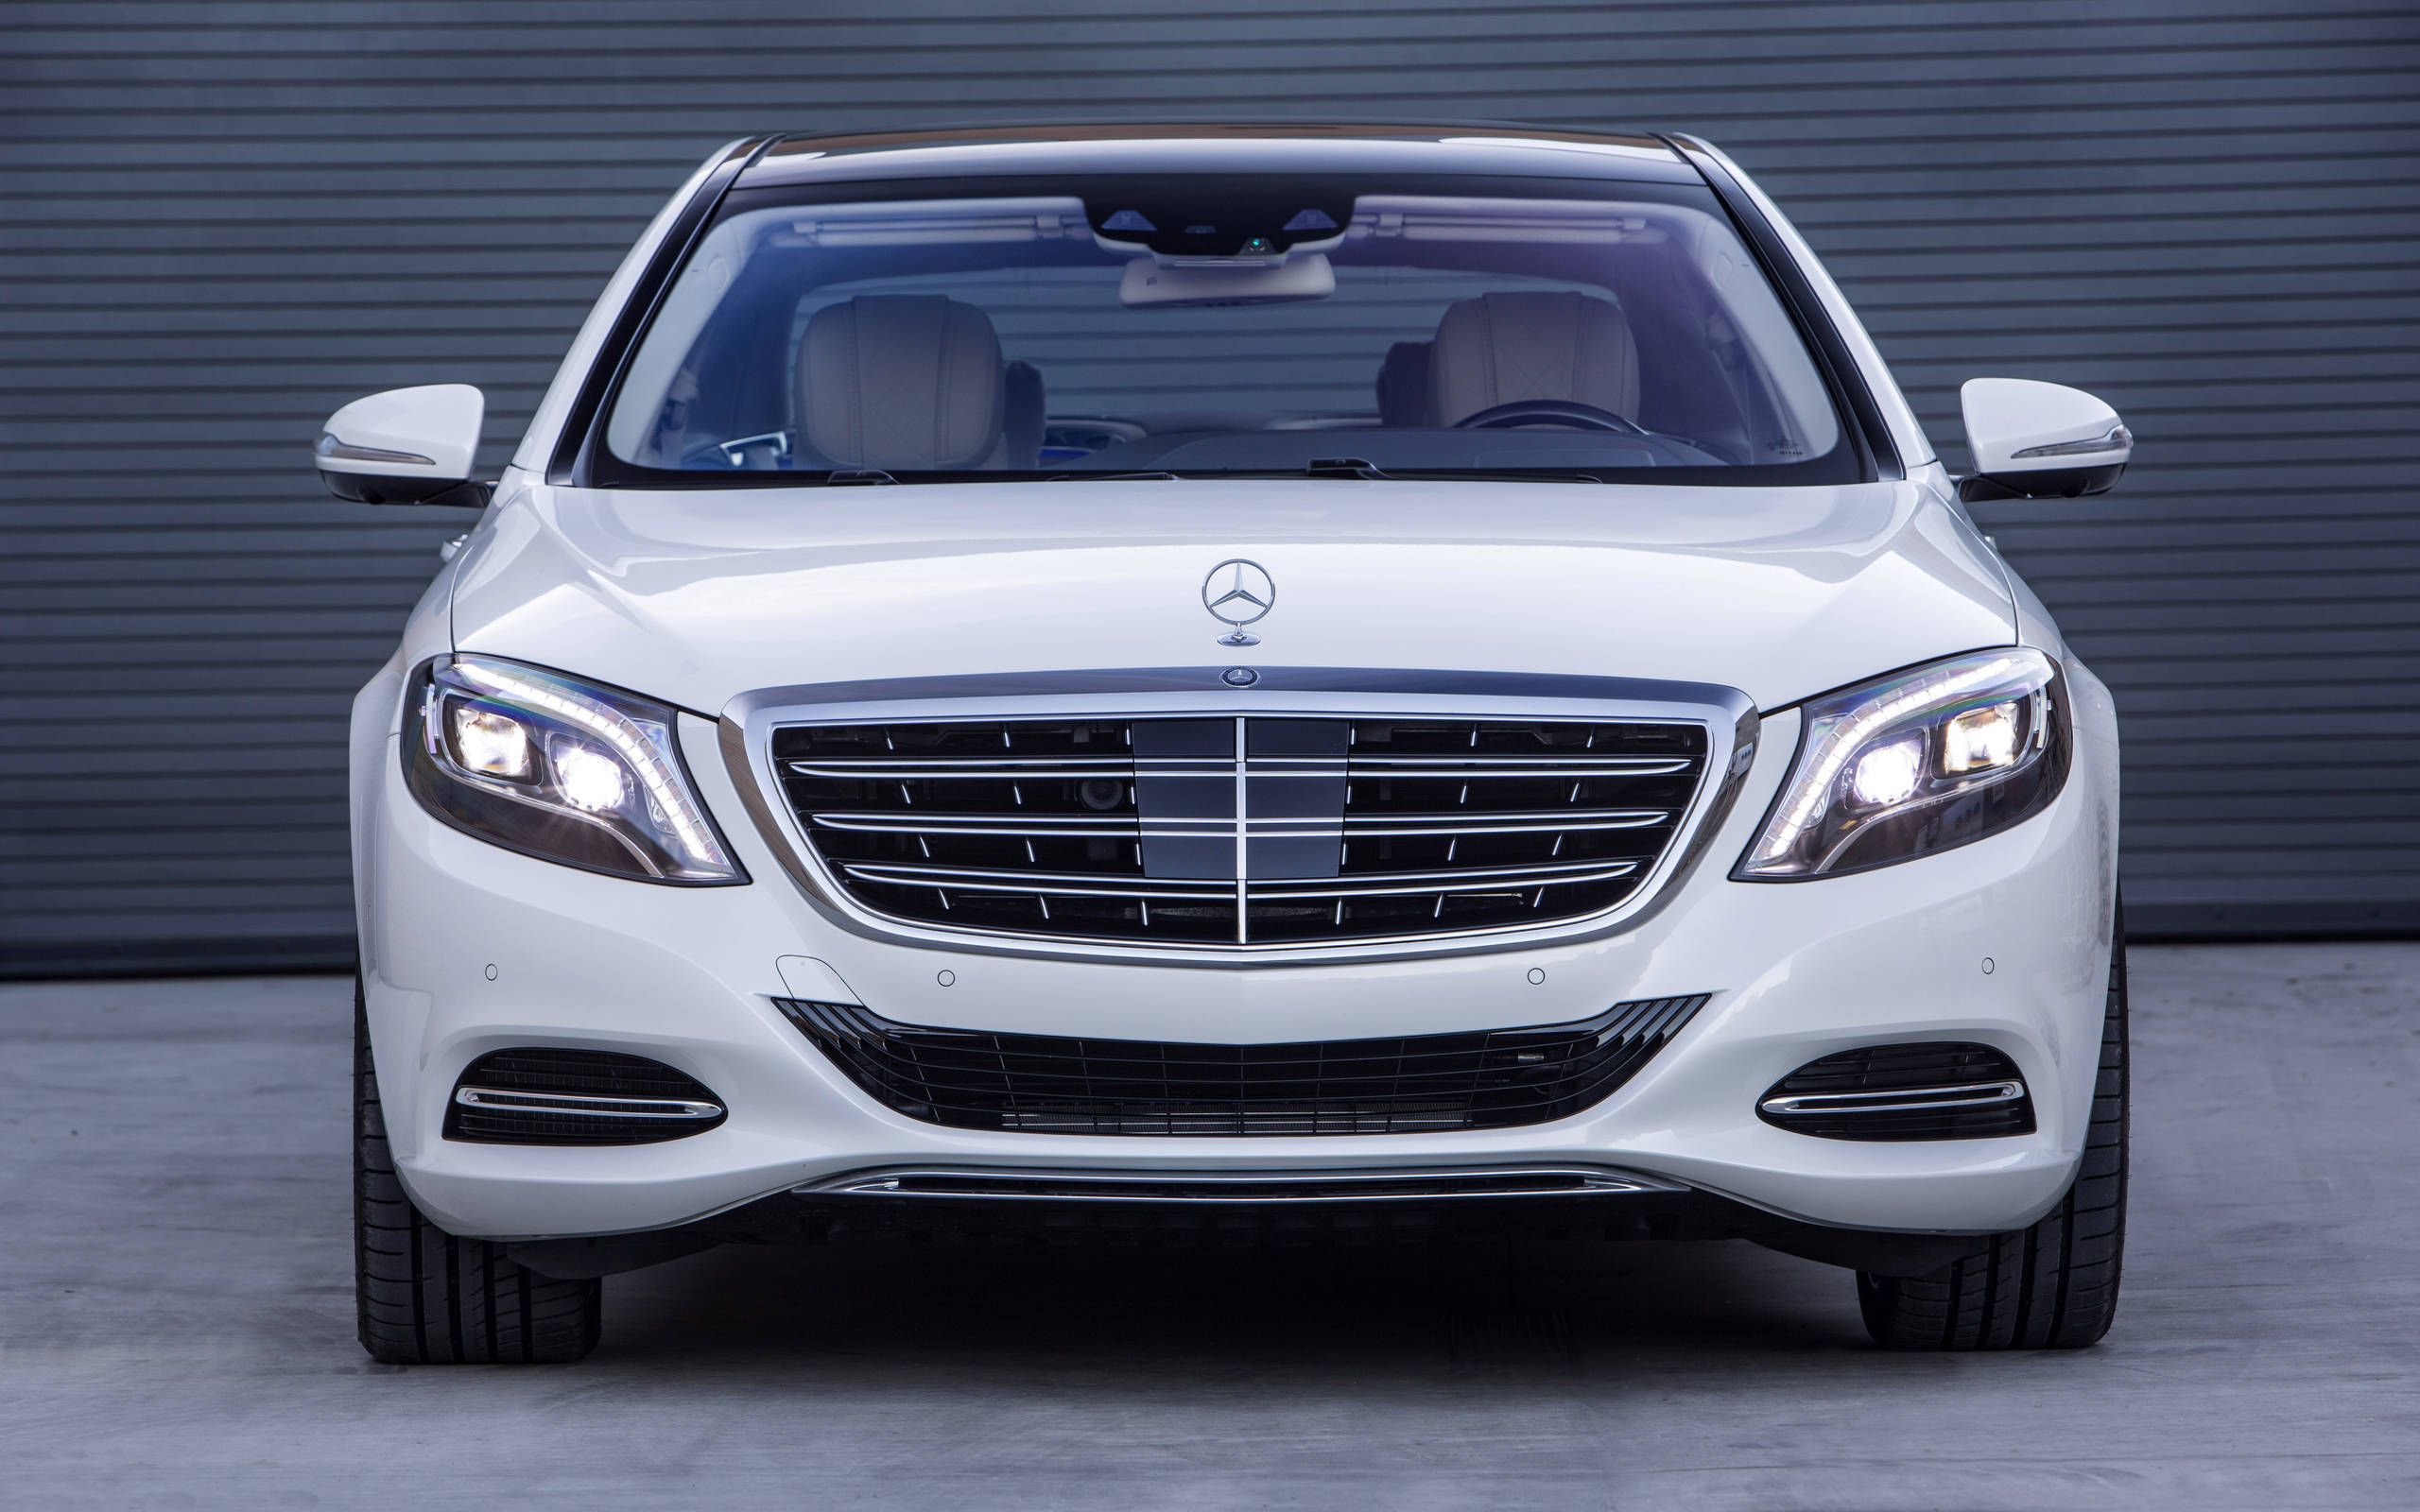 Gallery: 2016 Mercedes-Maybach S600